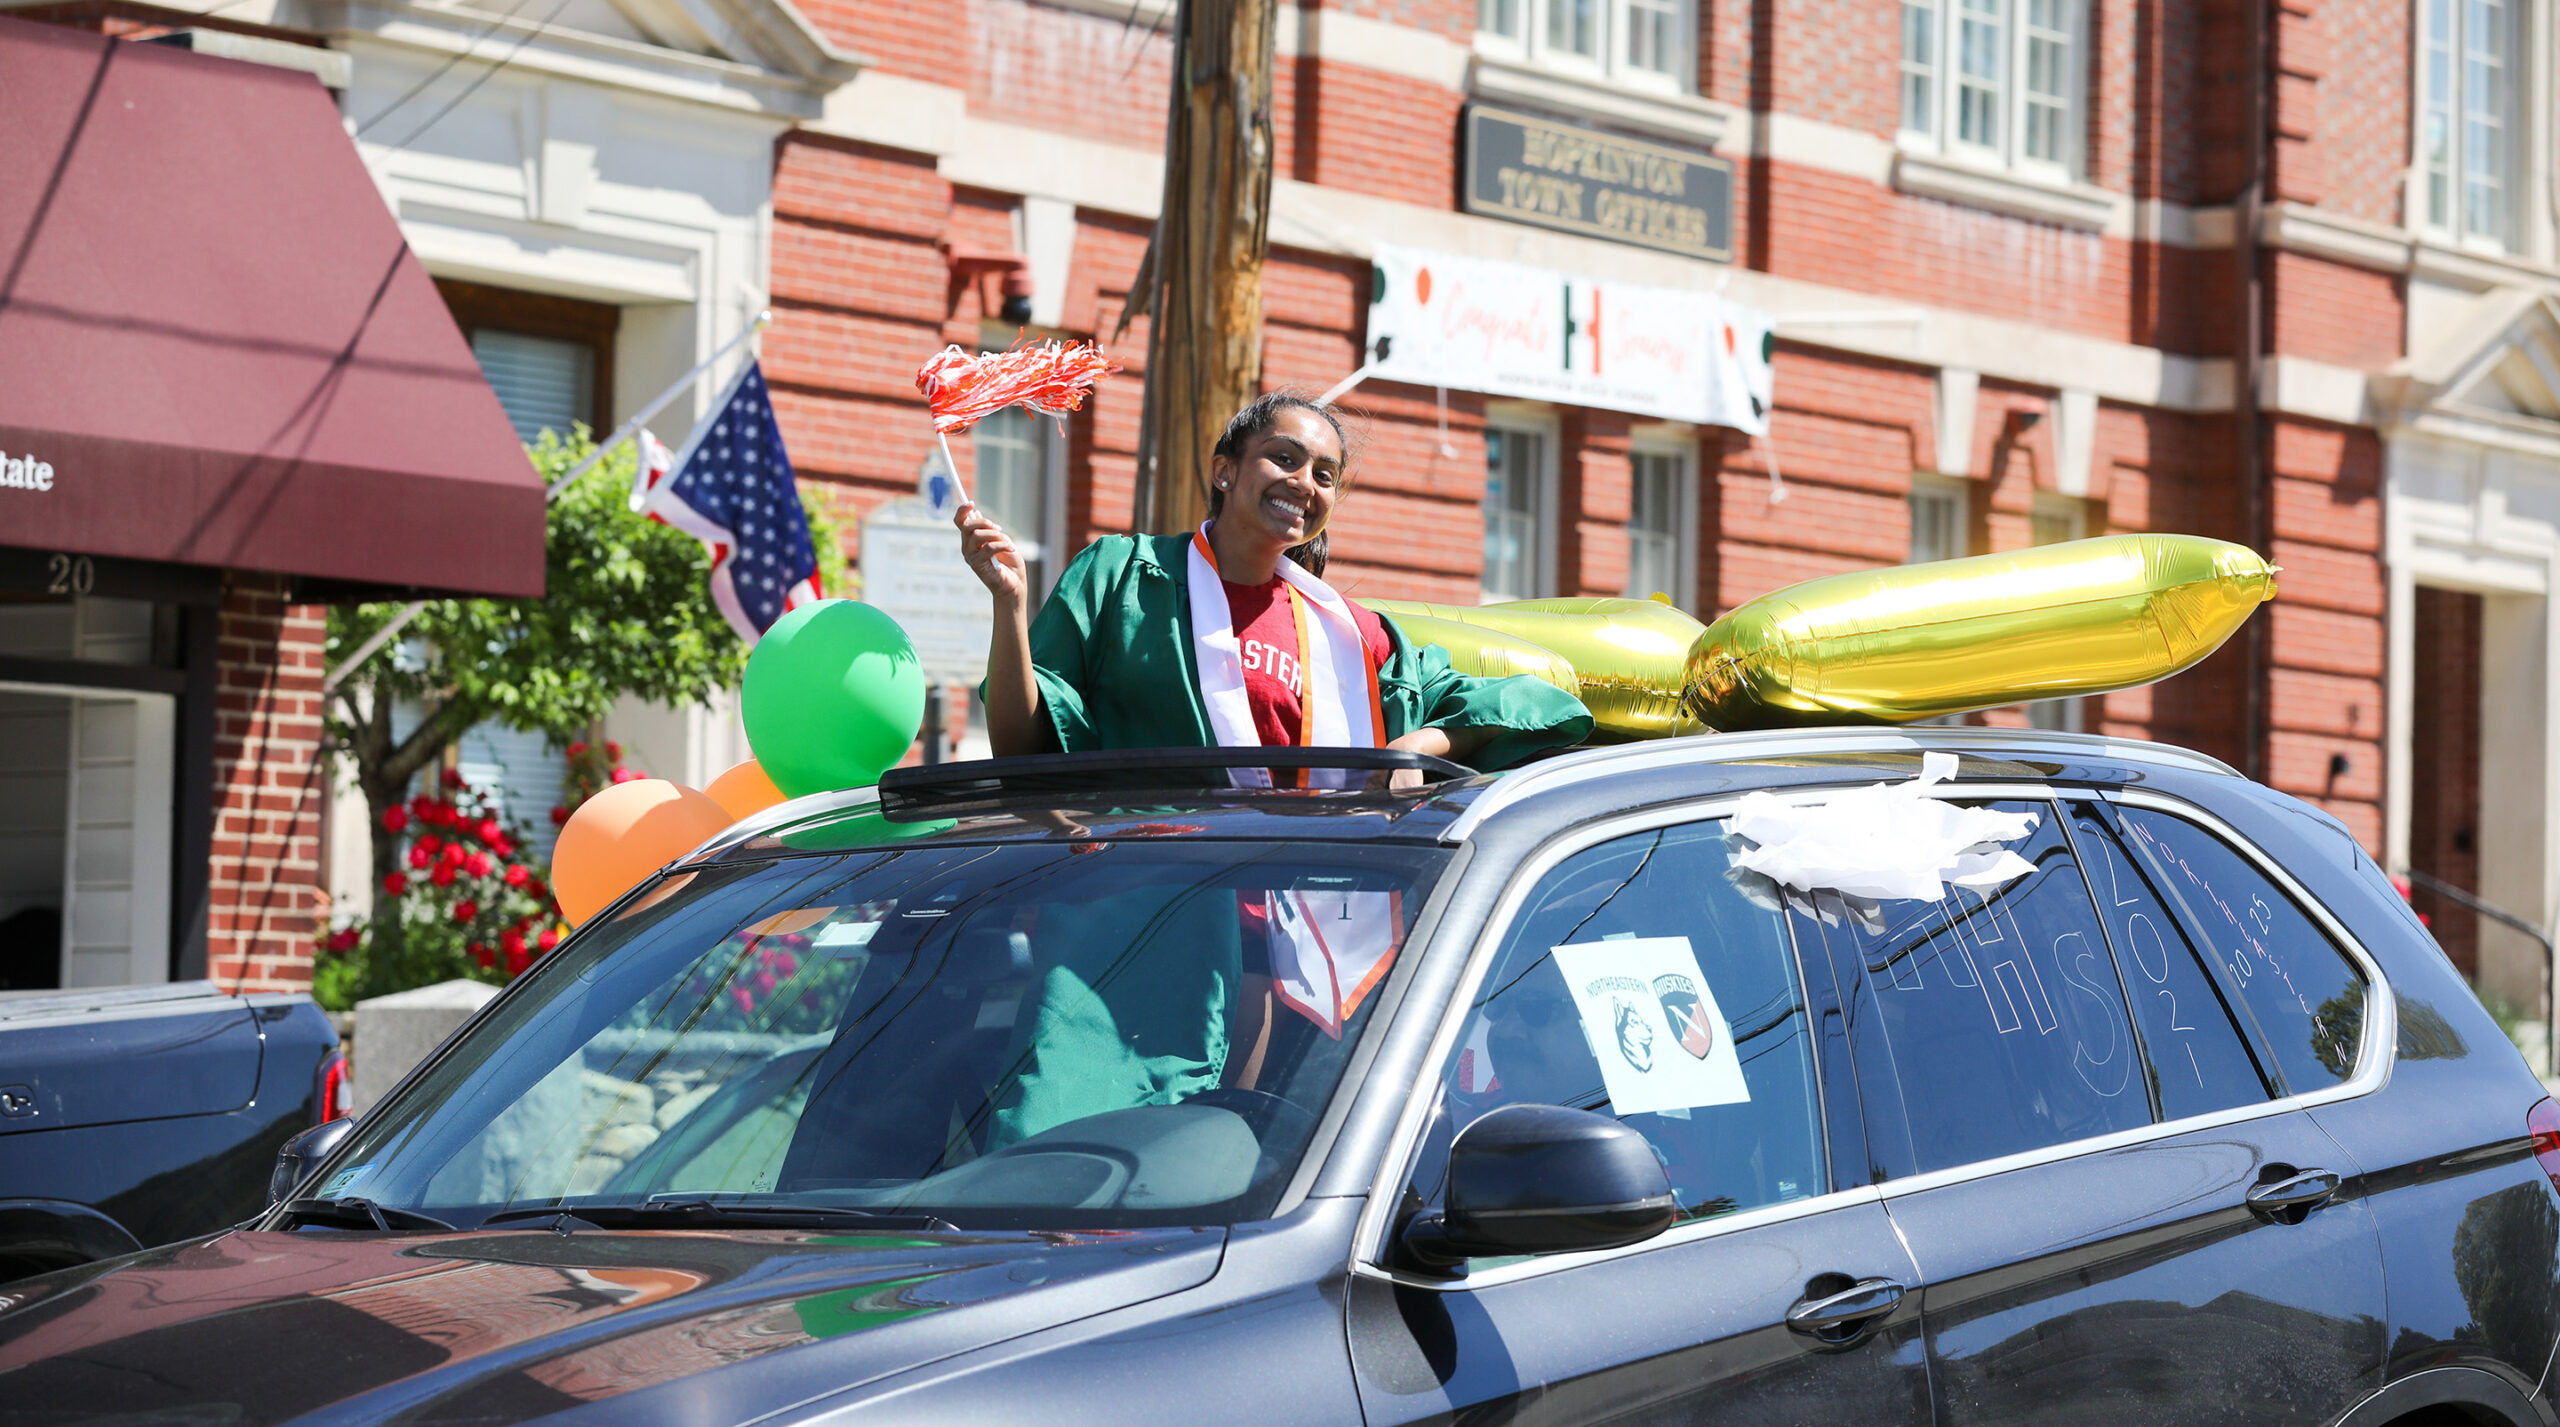 HHS graduation car parade gets tentative approval from Select Board